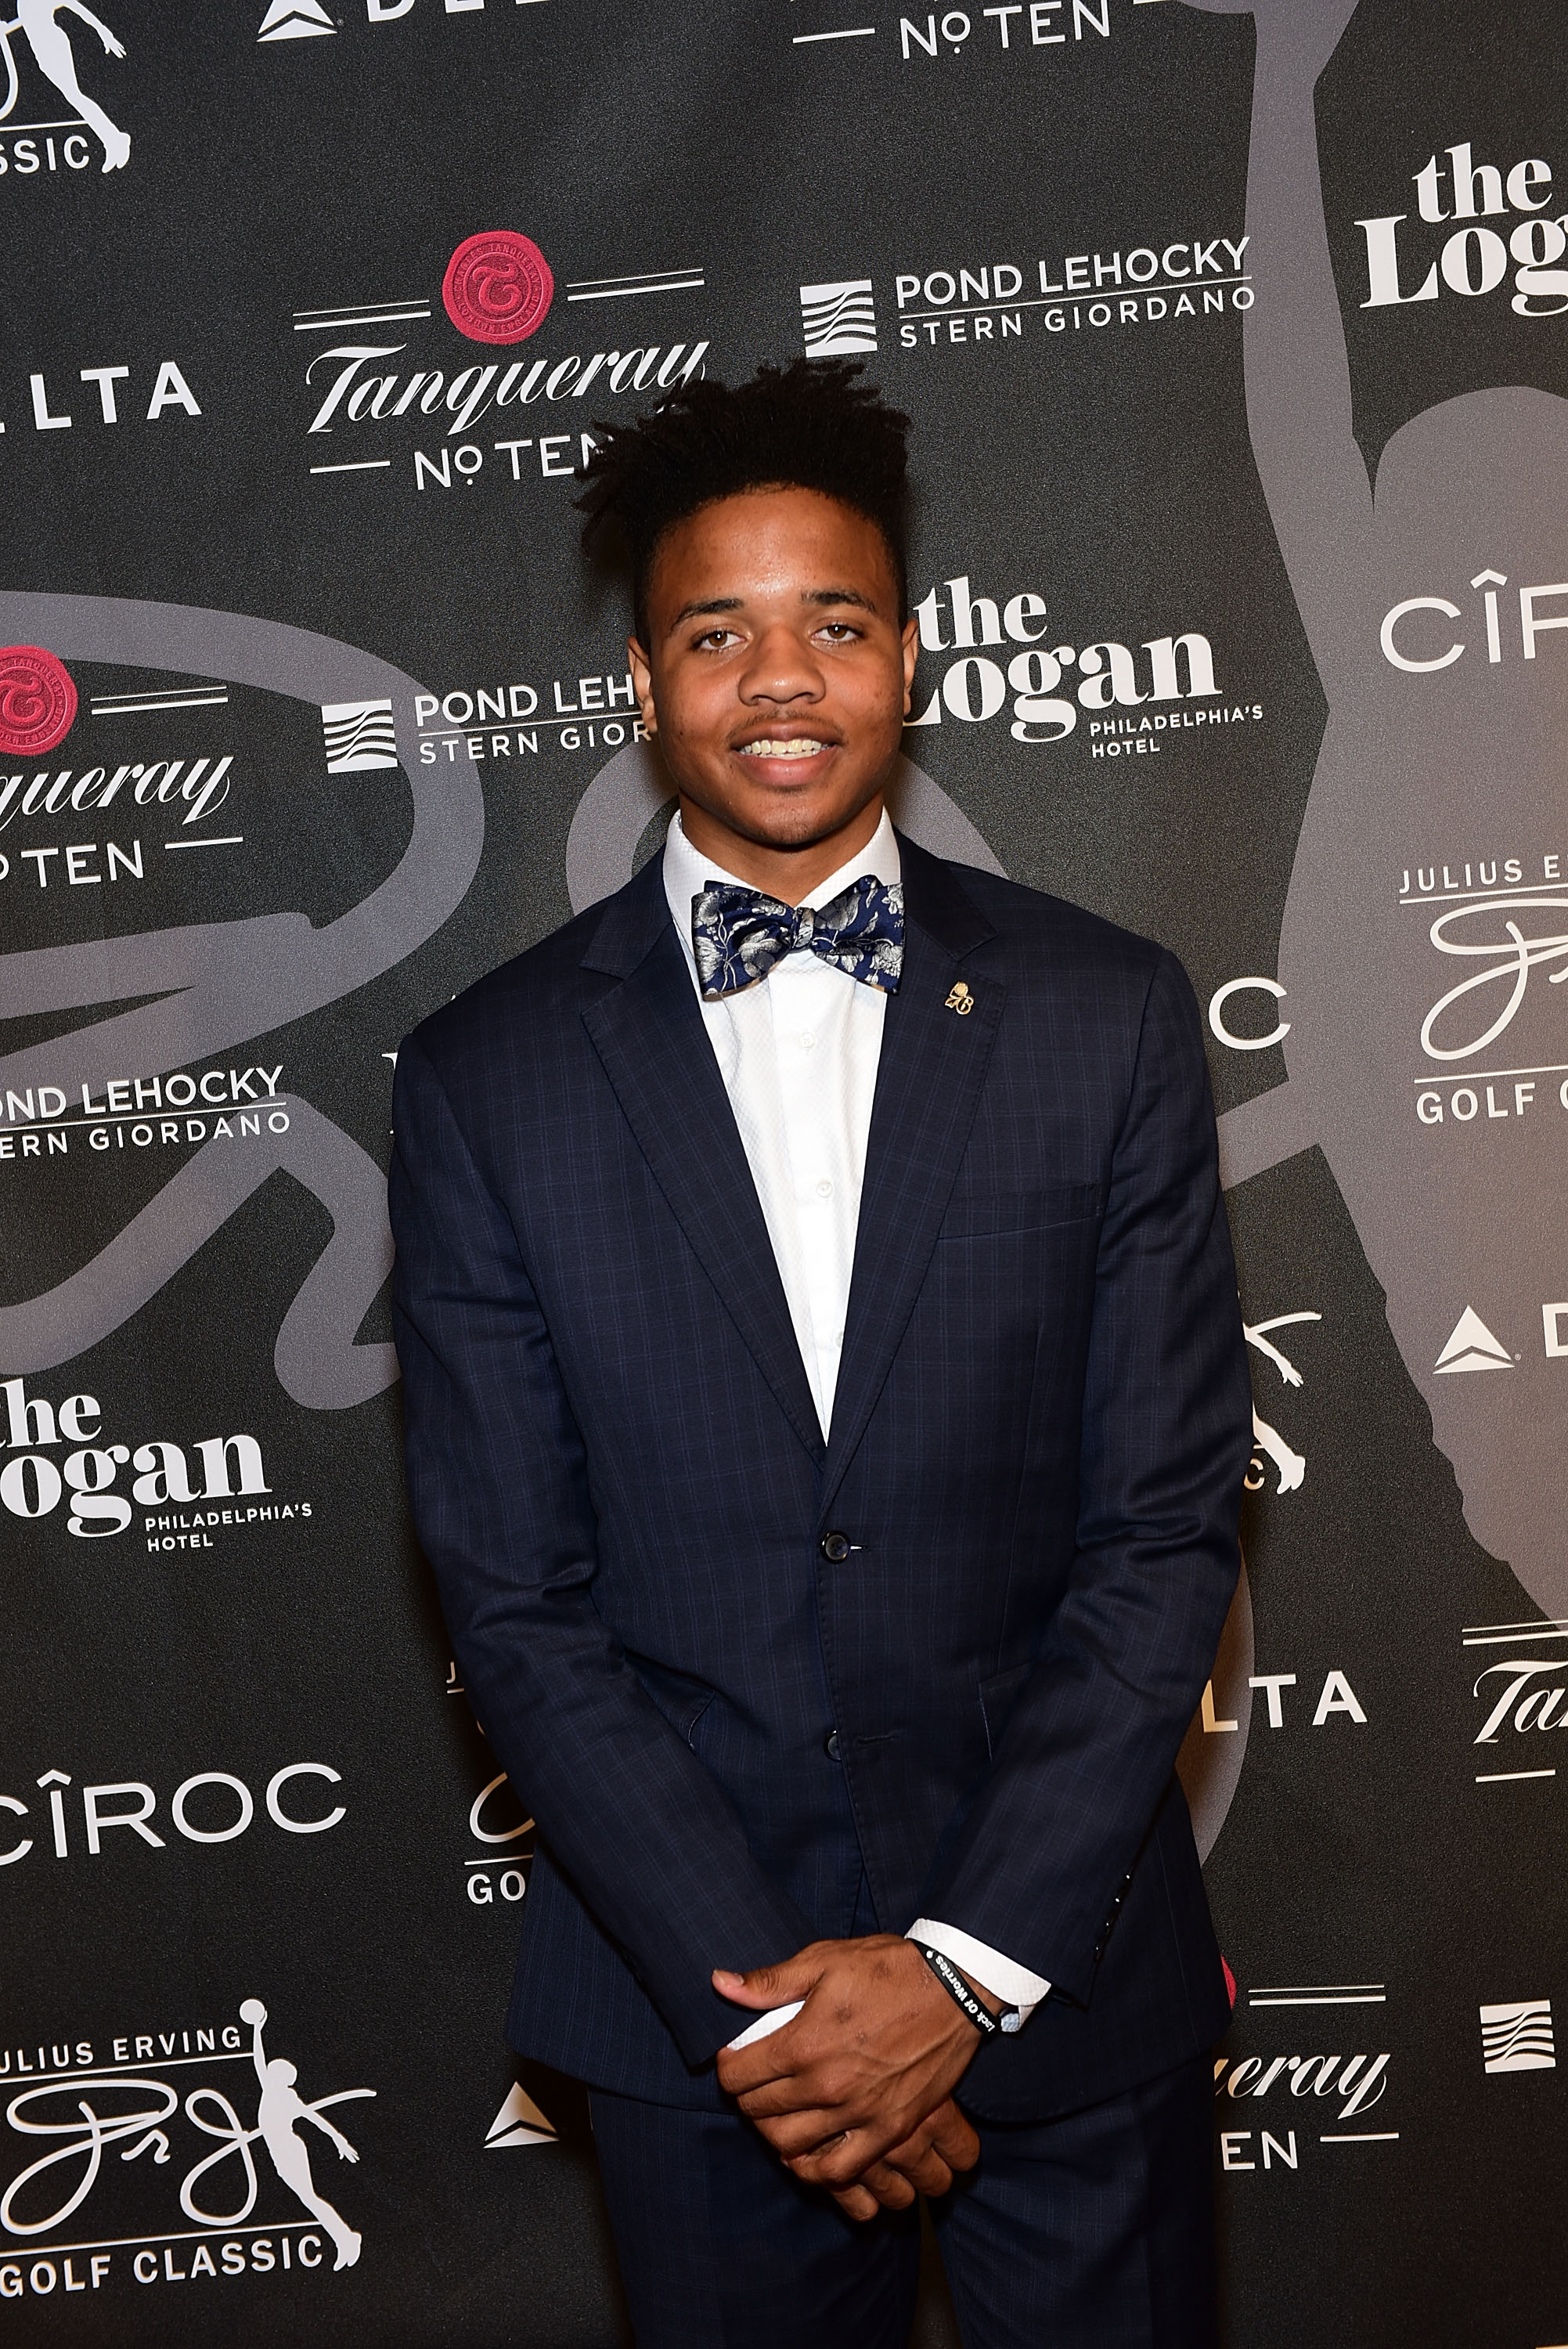 Markelle Fultz, 2017 NBA #1 First Round Draft Pick for The Philadelphia Sixers walks the red carpet at The 2017 Julius Erving Golf Classic